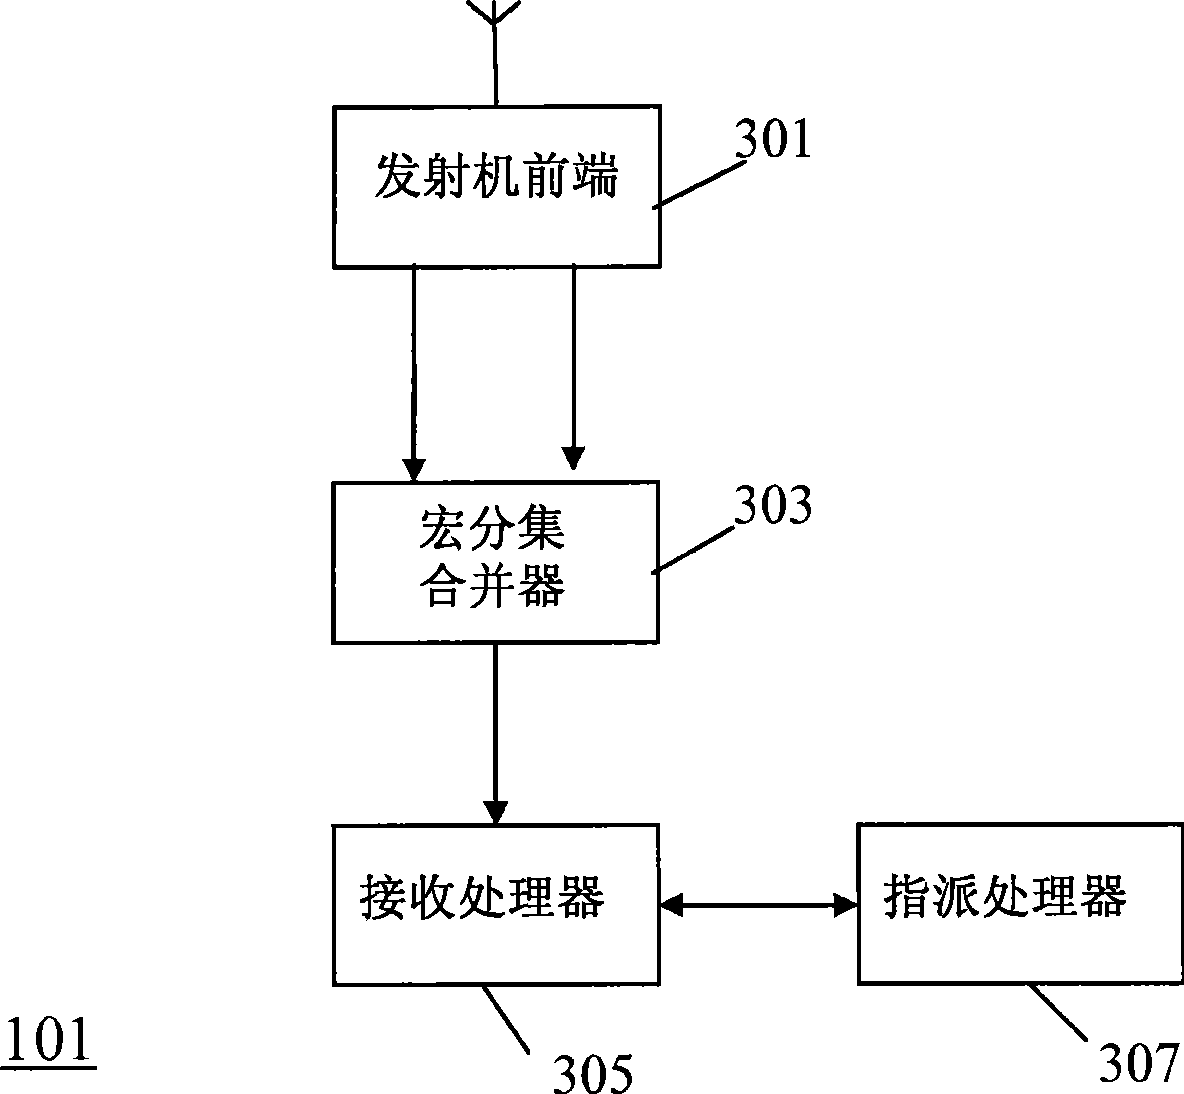 High speed downlink packet access communication in a cellular communication system